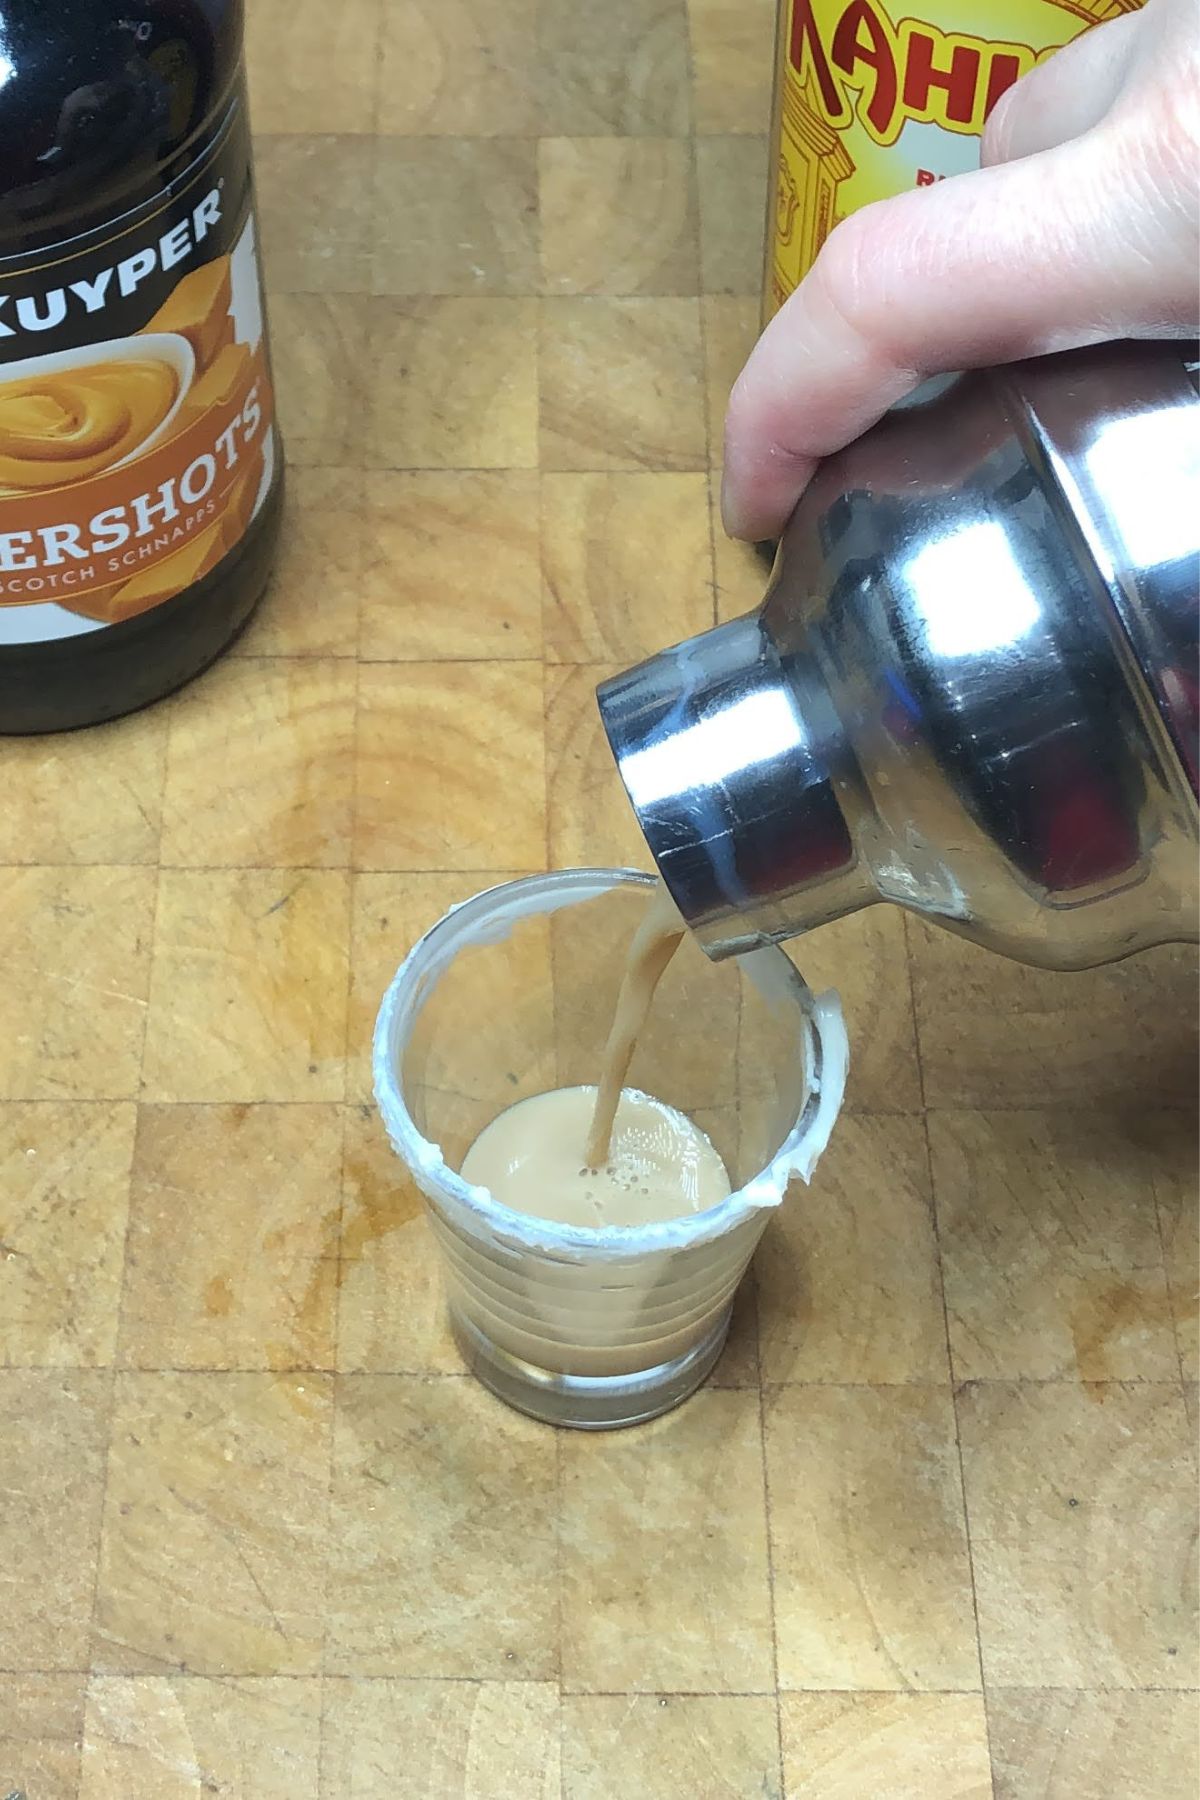 Pouring carrot cake shot from a shaker into a shot glass.